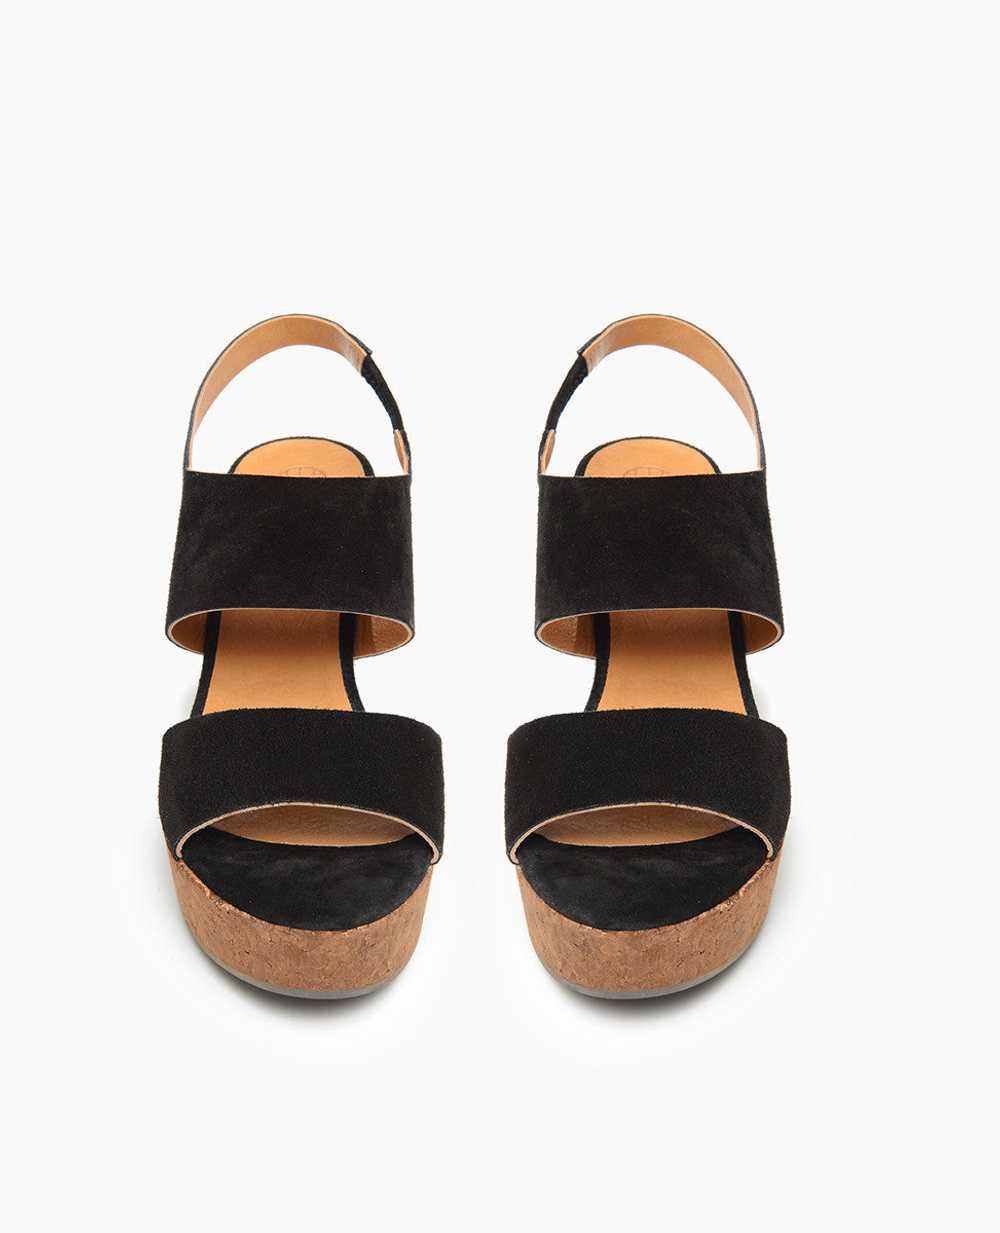 Coclico Glassy Wedge - Black Suede - image 4